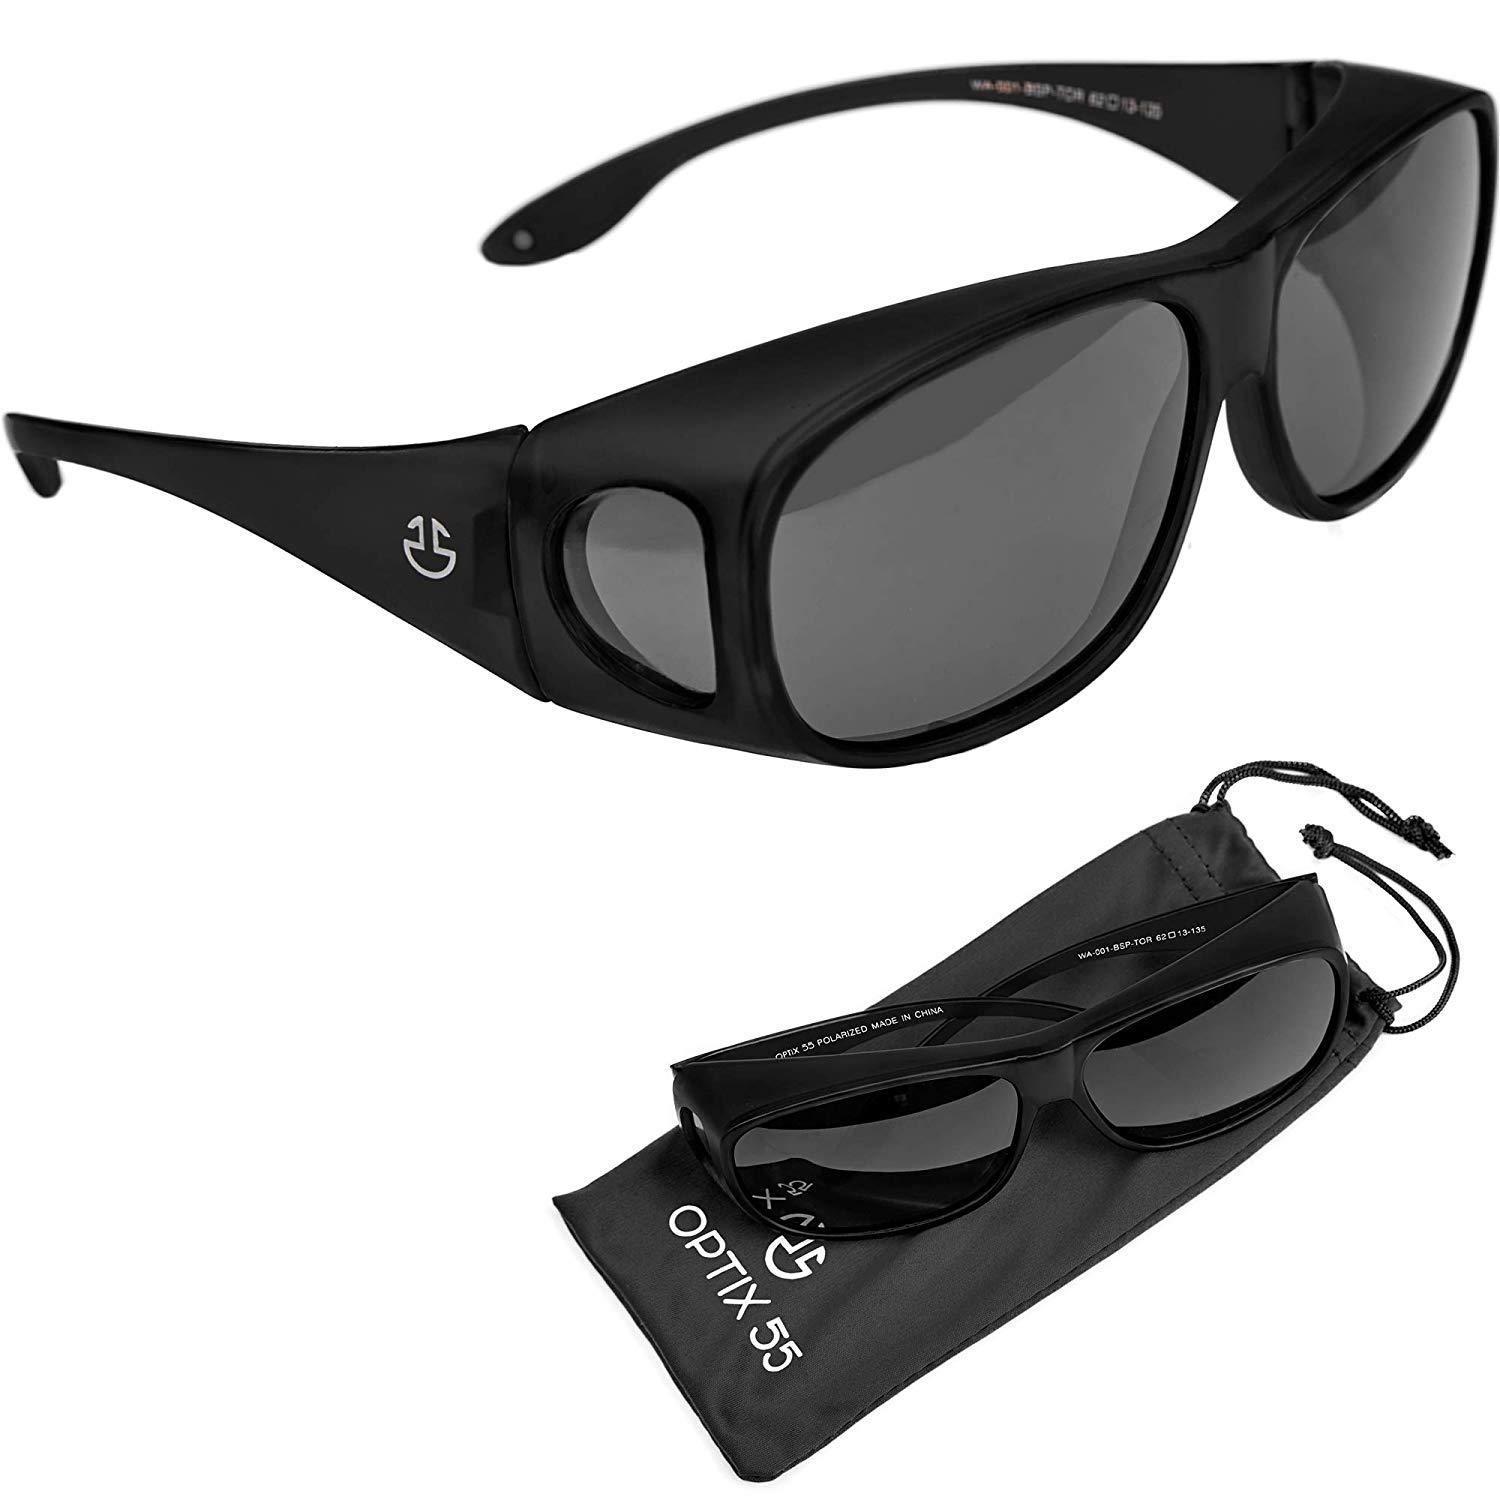 Wrap Around Sunglasses Uv Protection To Wear As Fit Over Glasses Unisex Sunglasses And Fashion